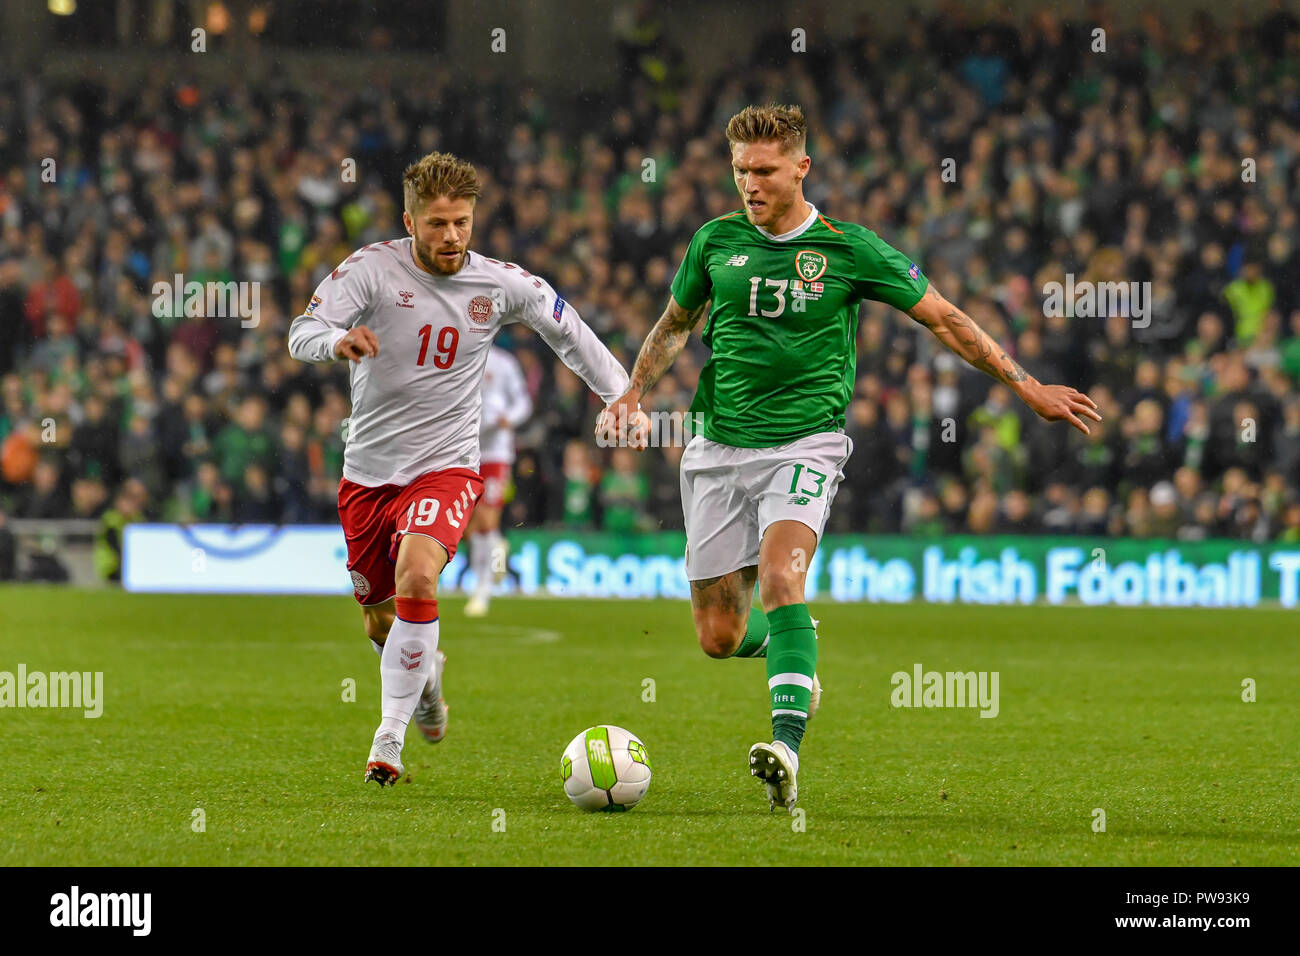 Dublin, Ireland. 13th Oct, 2018. Lasse Schone and Jeff Hendrick in action during the Rep of Ireland vs Denmark UEFA Nations League match at the Aviva Stadium. Score 0-0 Credit: Ben Ryan/SOPA Images/ZUMA Wire/Alamy Live News Stock Photo